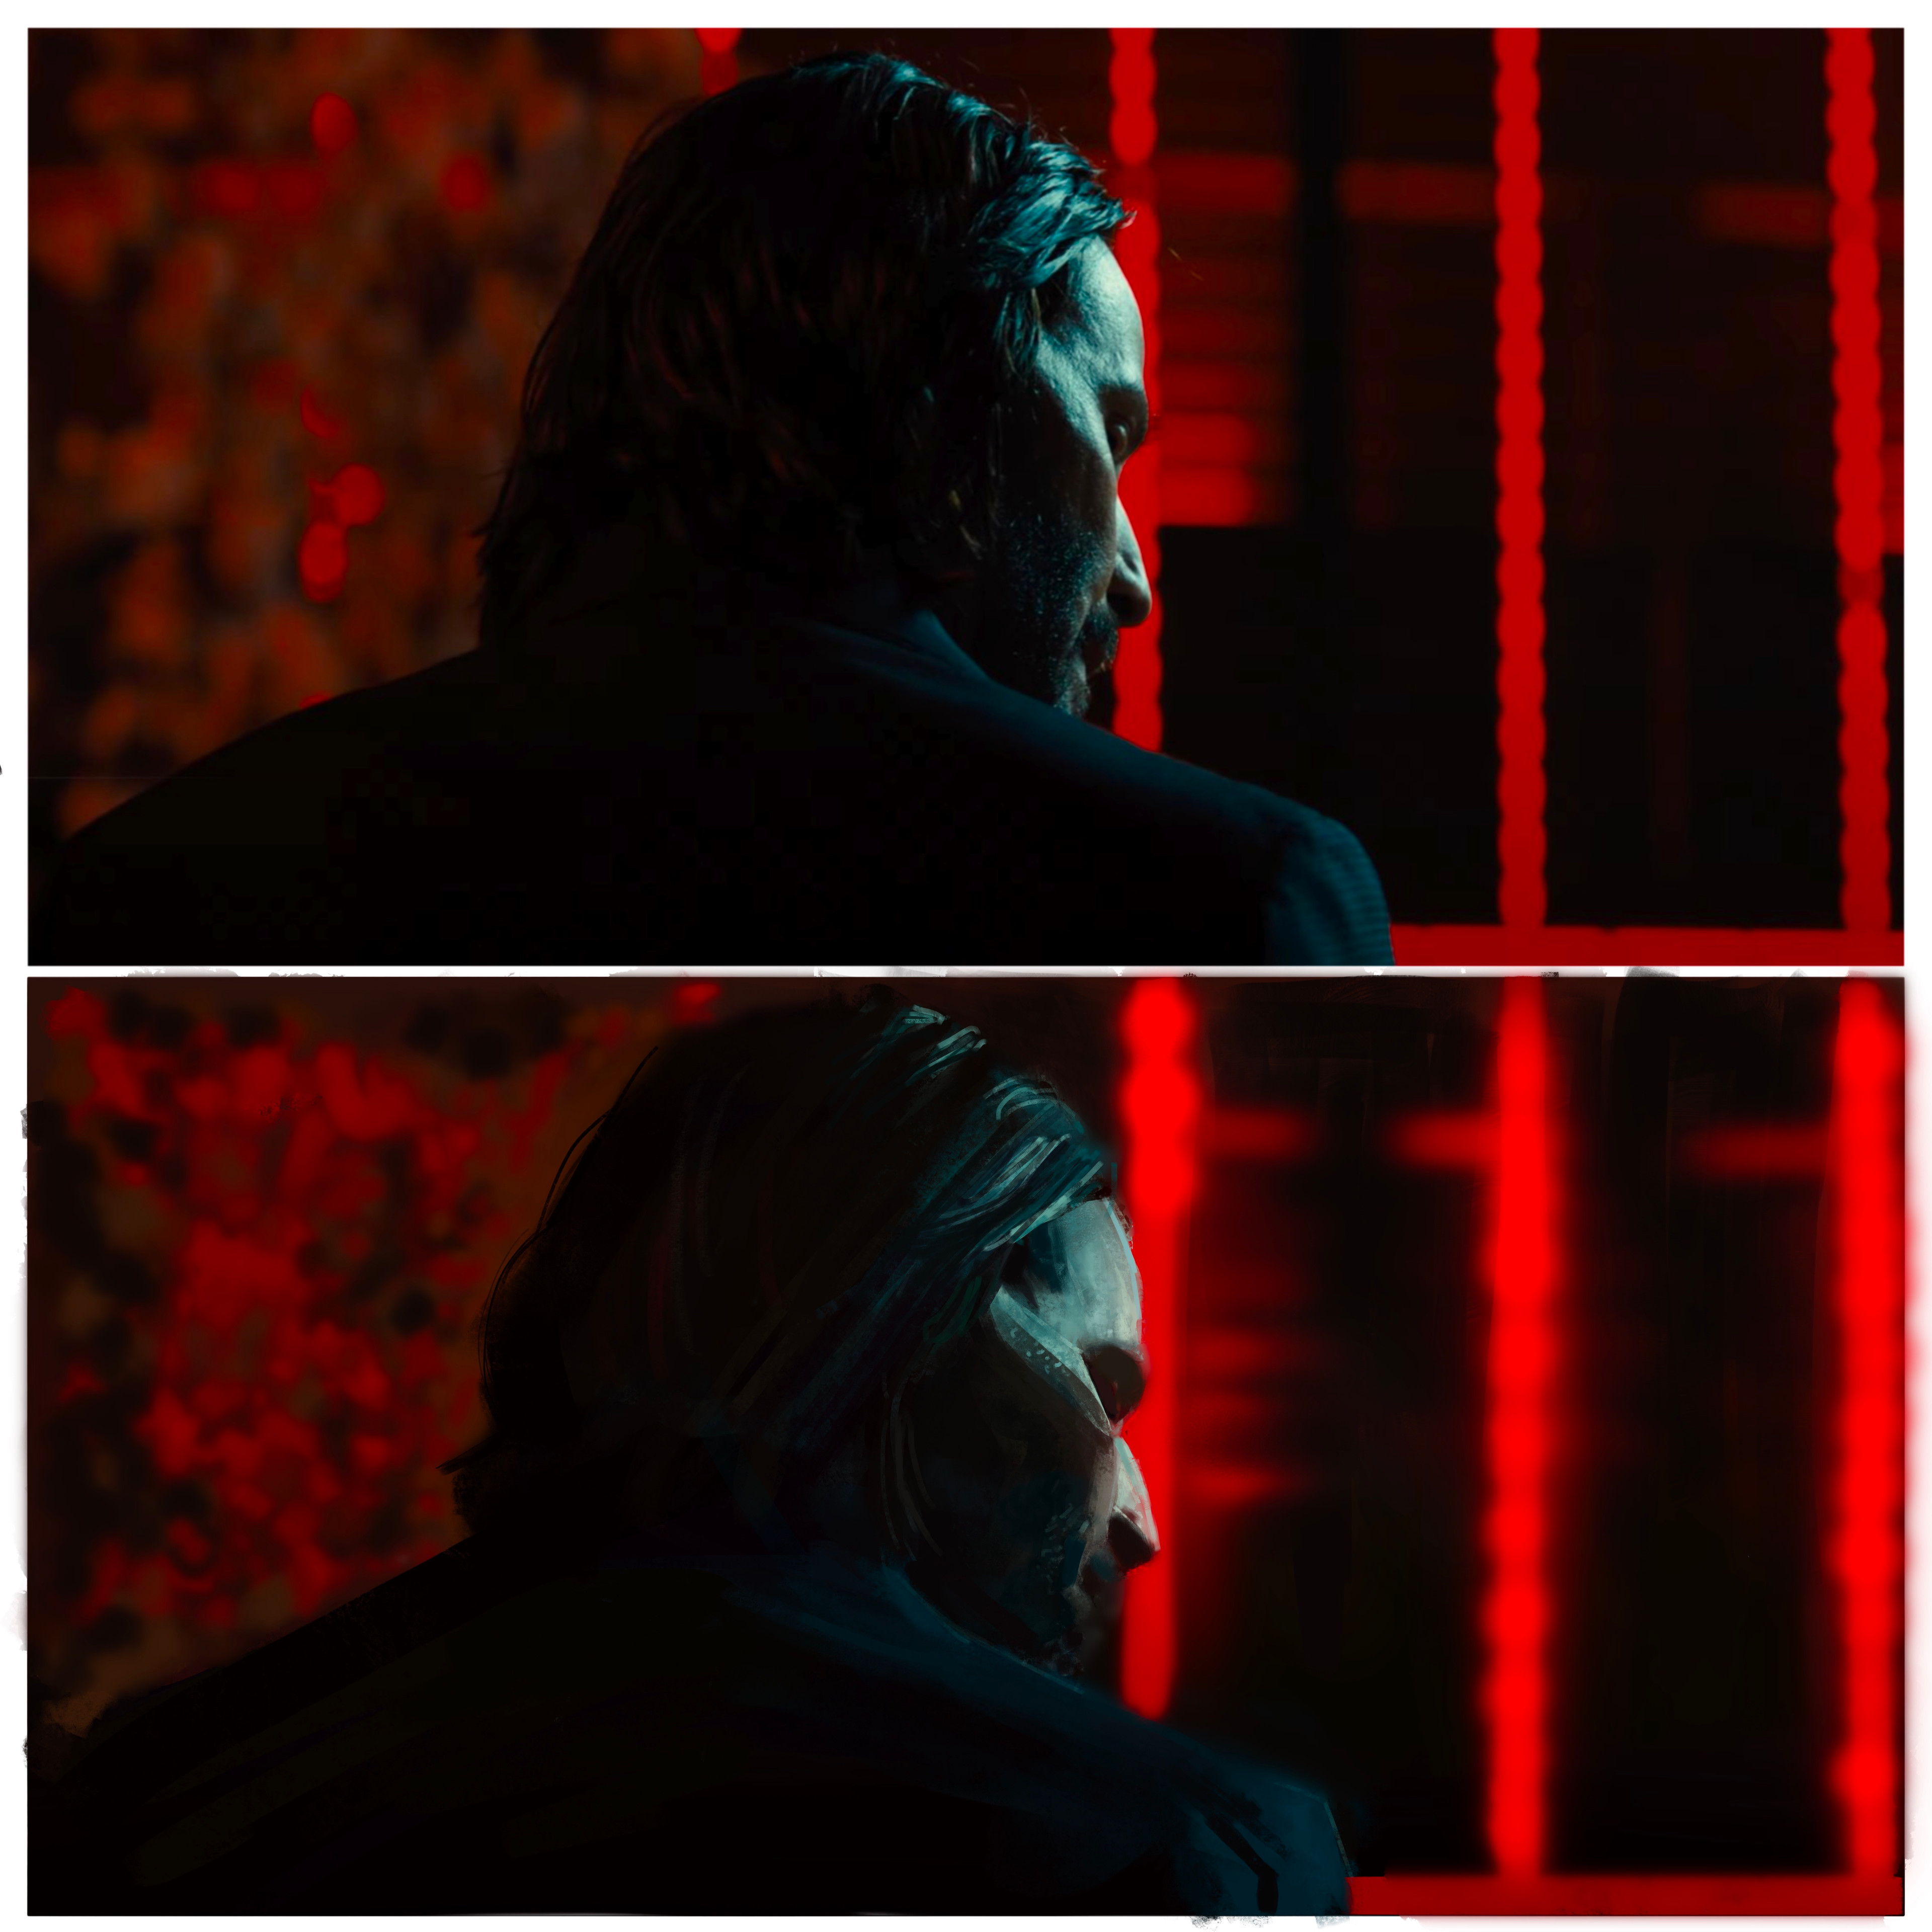 Autopsy Of A Scene — John Wick. Exploration of the artistic